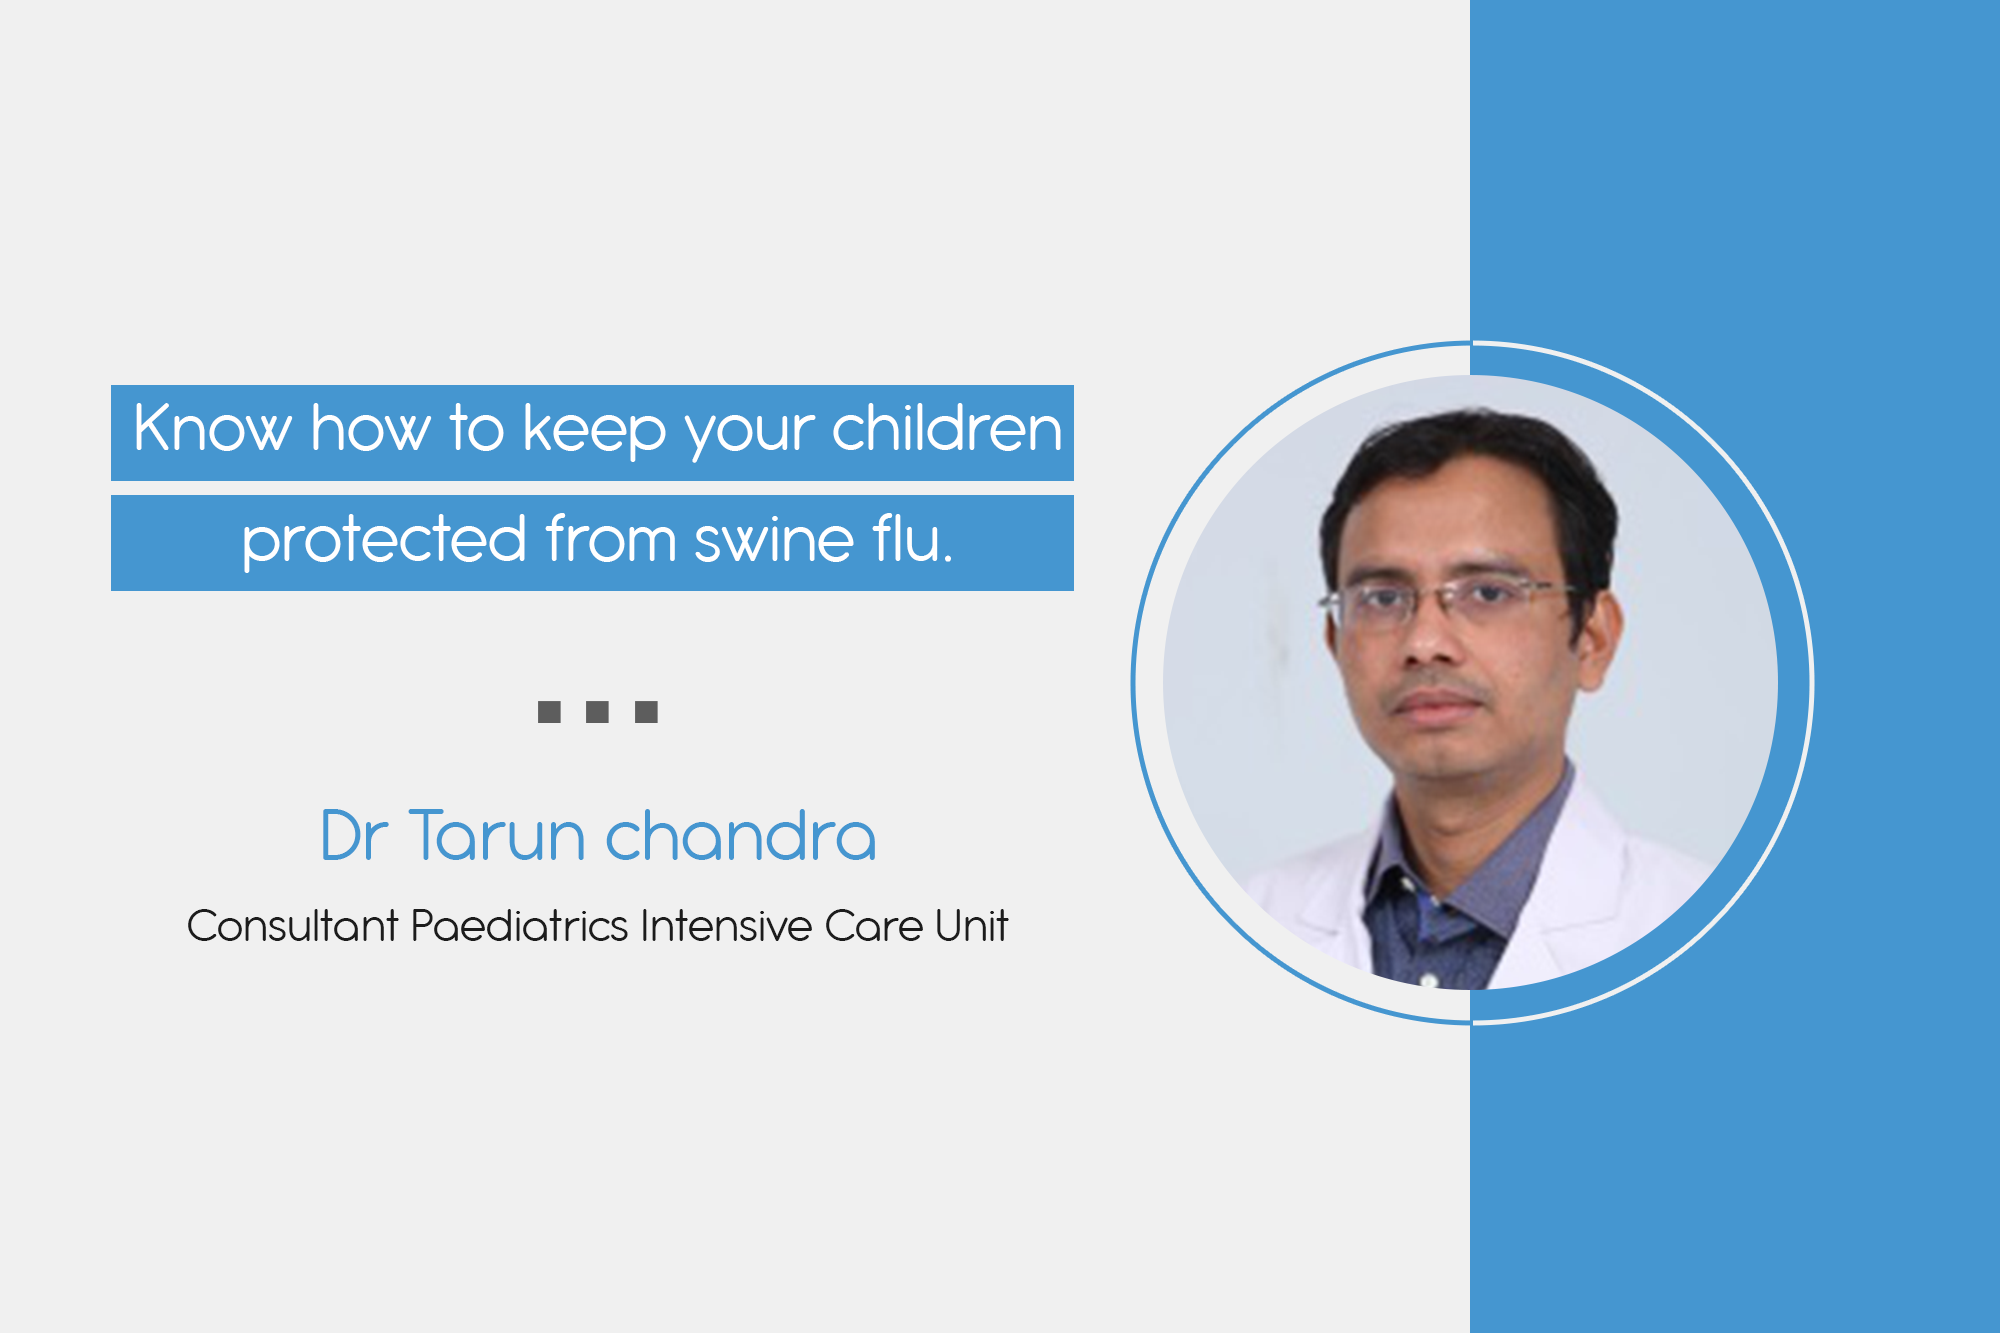 Know how to keep your children protected from swine flu